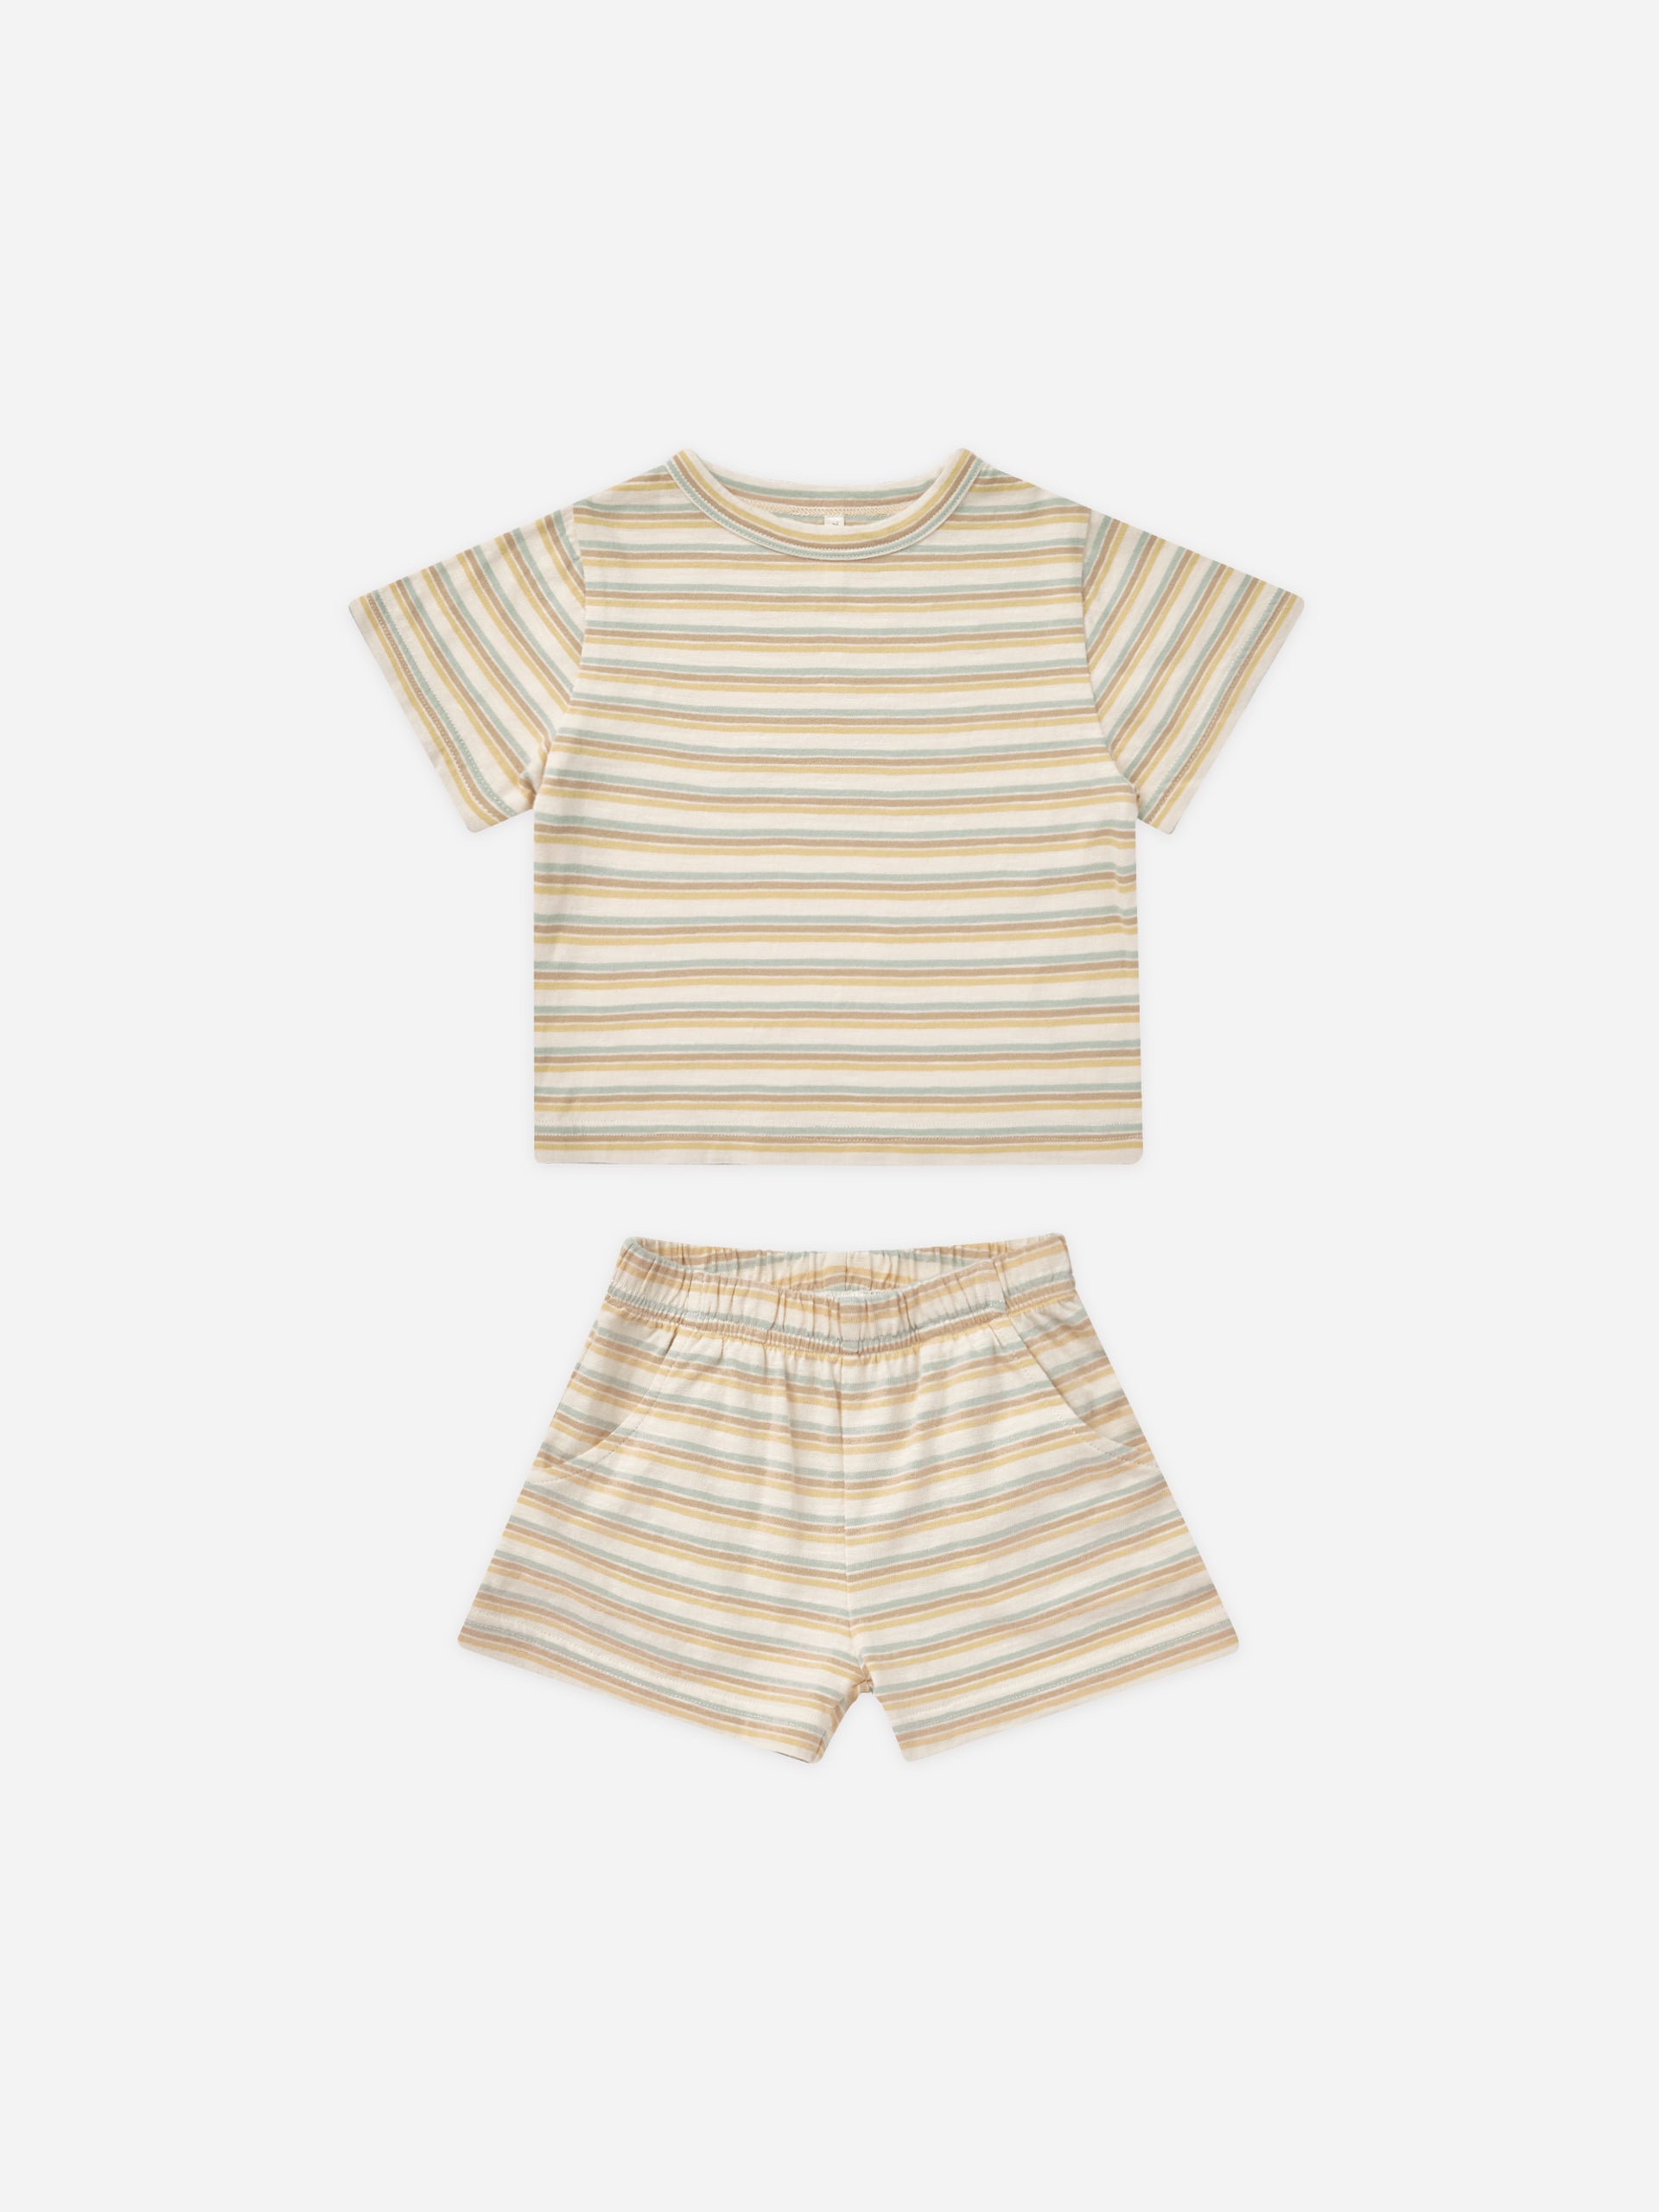 Jersey Set || Vintage Stripe - Rylee + Cru | Kids Clothes | Trendy Baby Clothes | Modern Infant Outfits |